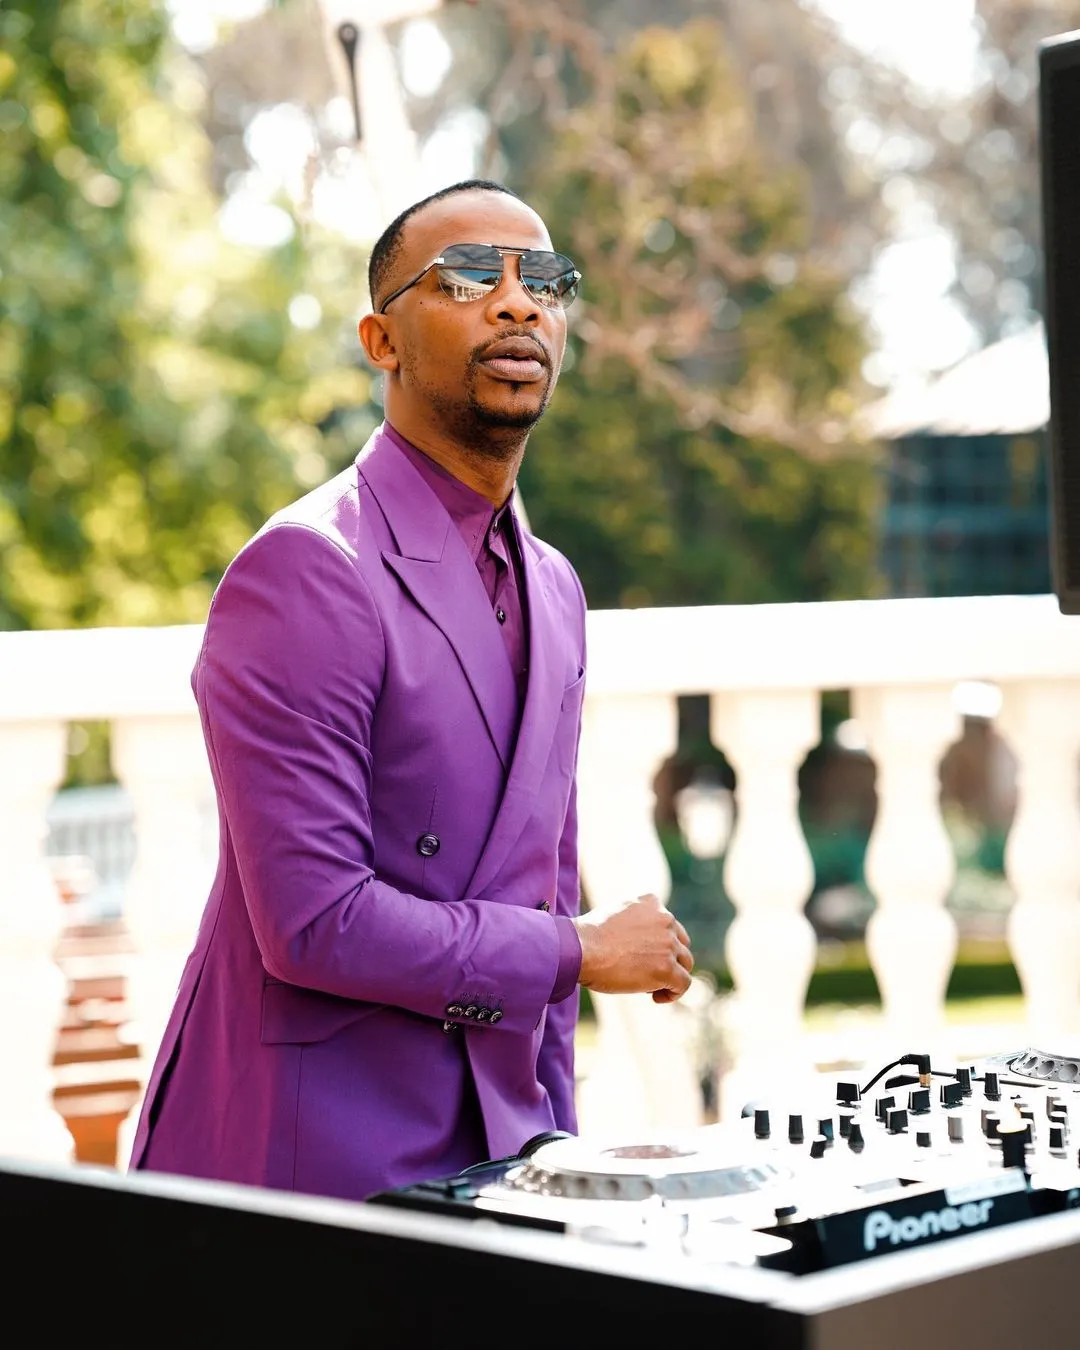 Zakes Bantwini Shares appreciation message after Grammy nomination party